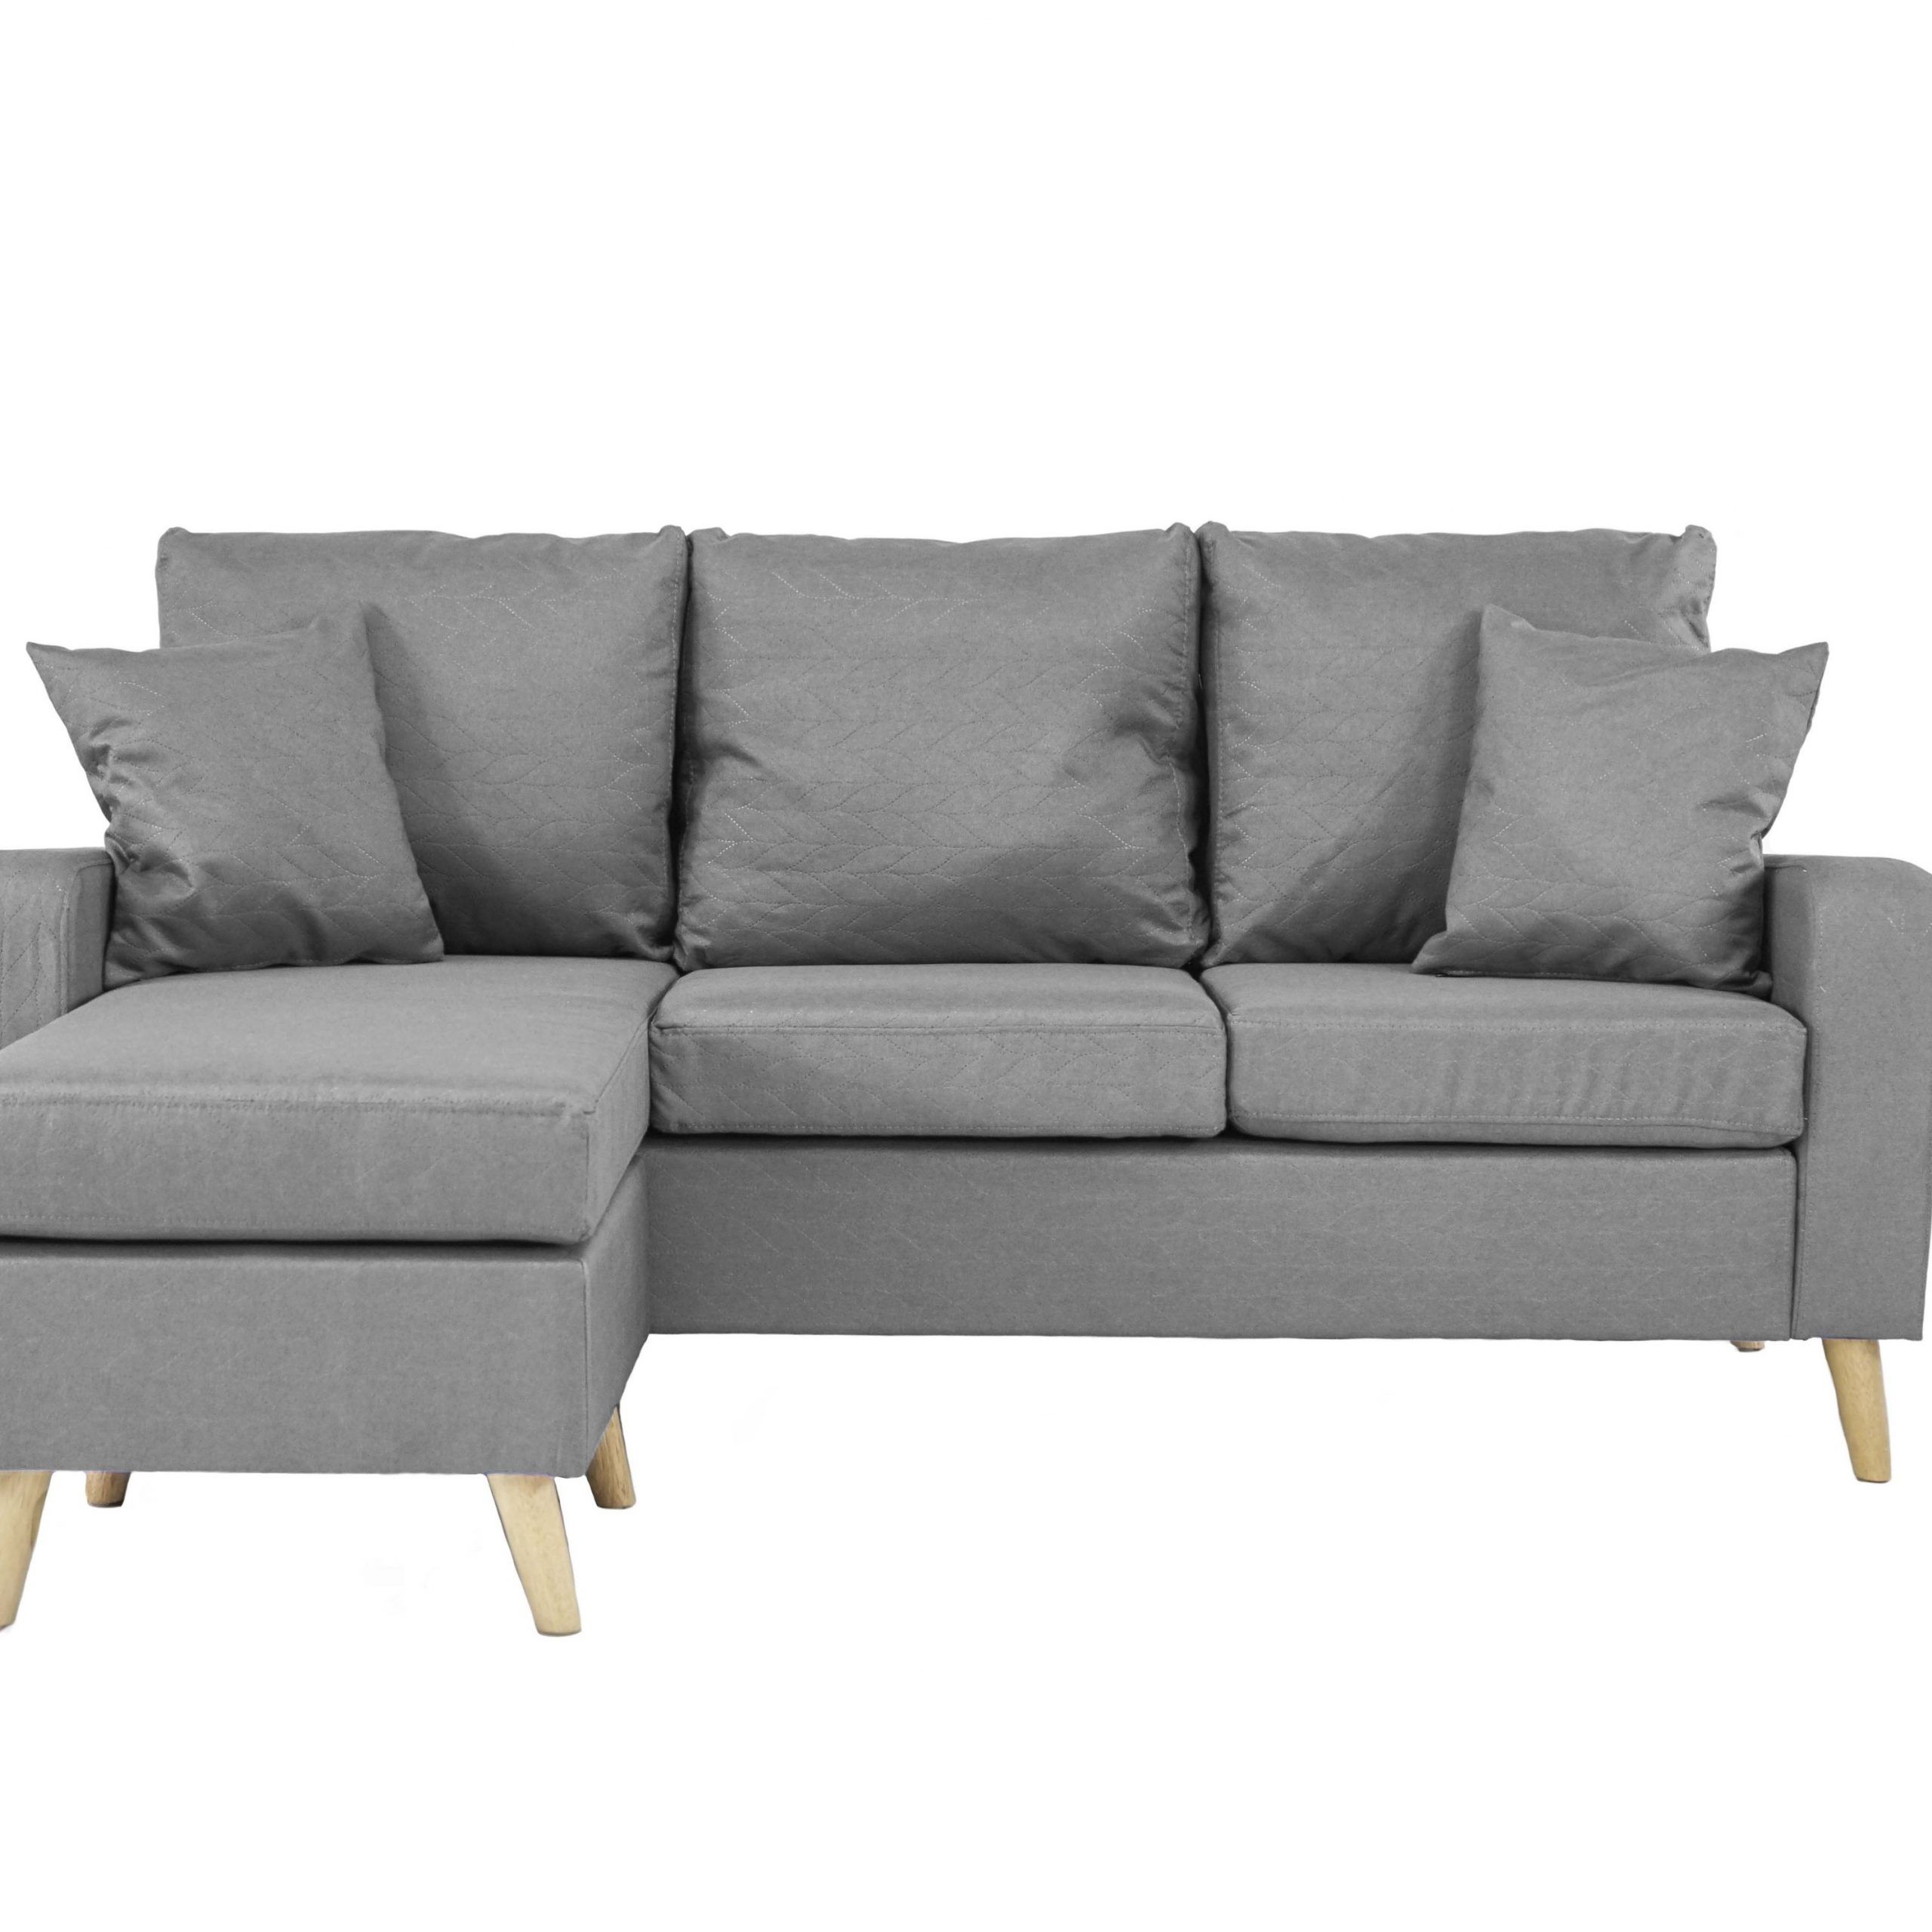 Grey Small Space Configurable L Shape Couch Sectional Sofa Regarding Dulce Mid Century Chaise Sofas Light Gray (View 1 of 15)